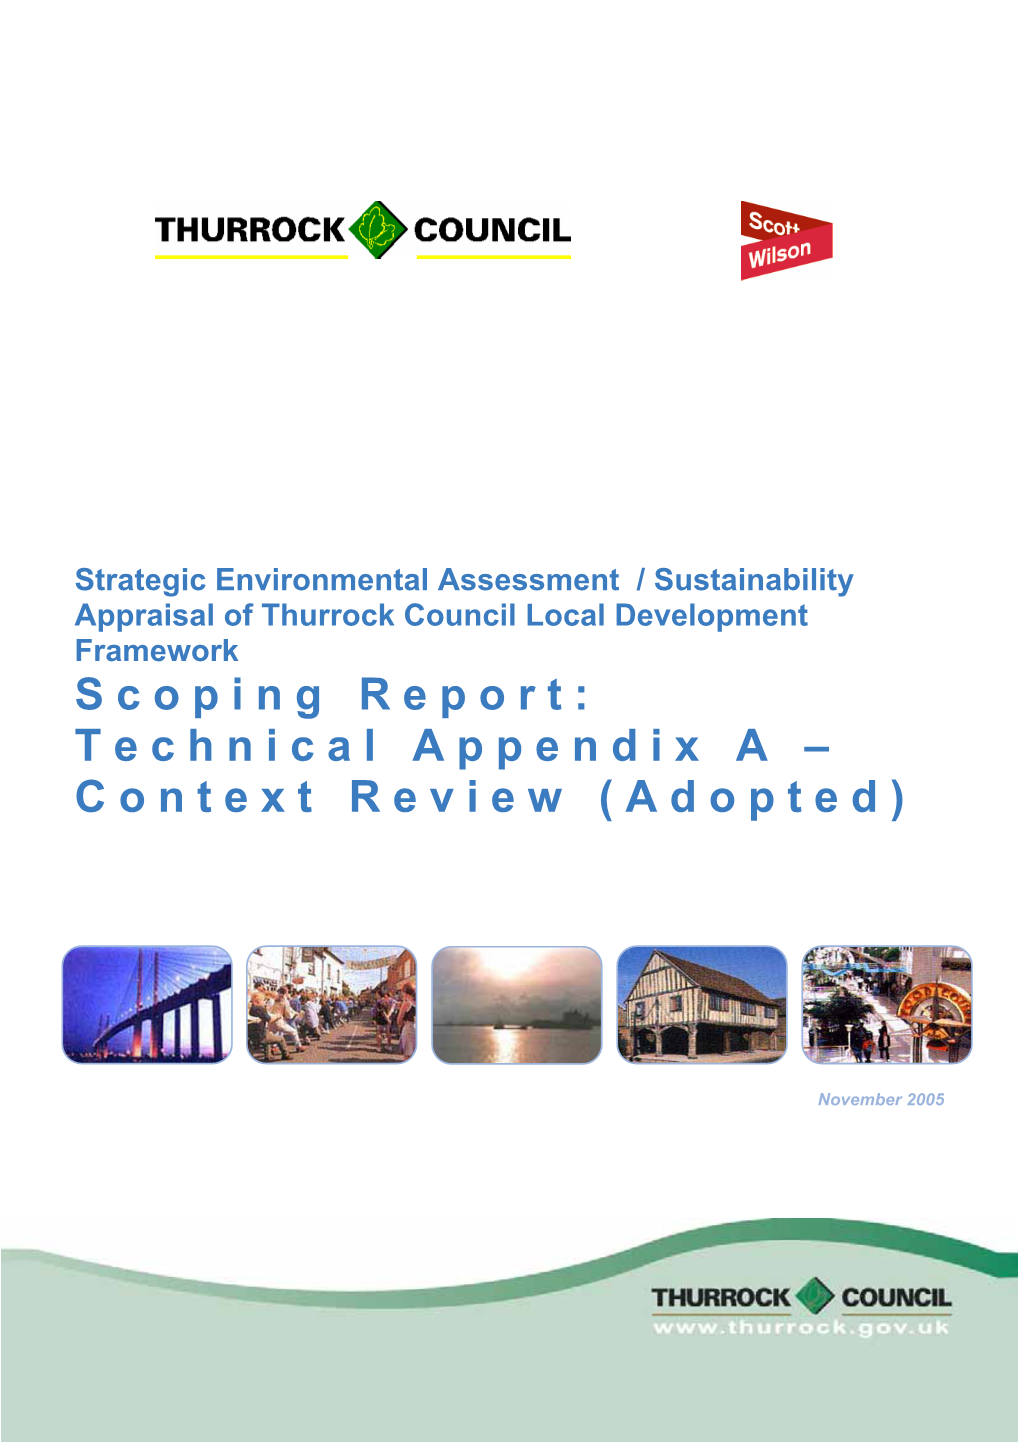 Scoping Report: Technical Appendix a – Context Review (Adopted)